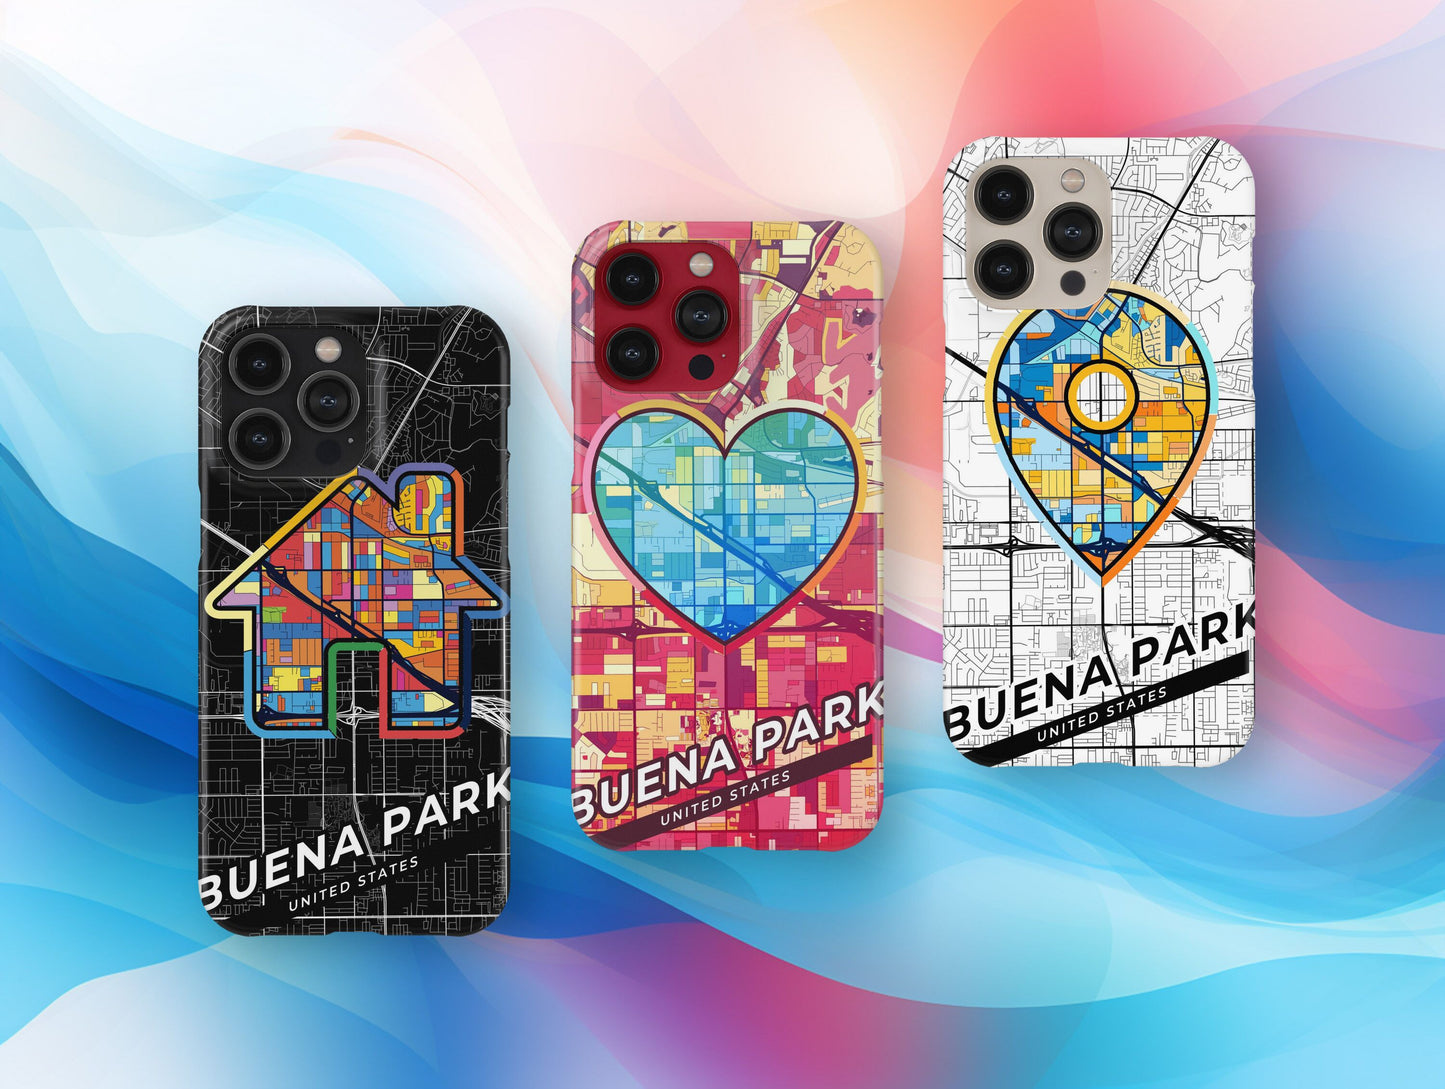 Buena Park California slim phone case with colorful icon. Birthday, wedding or housewarming gift. Couple match cases.